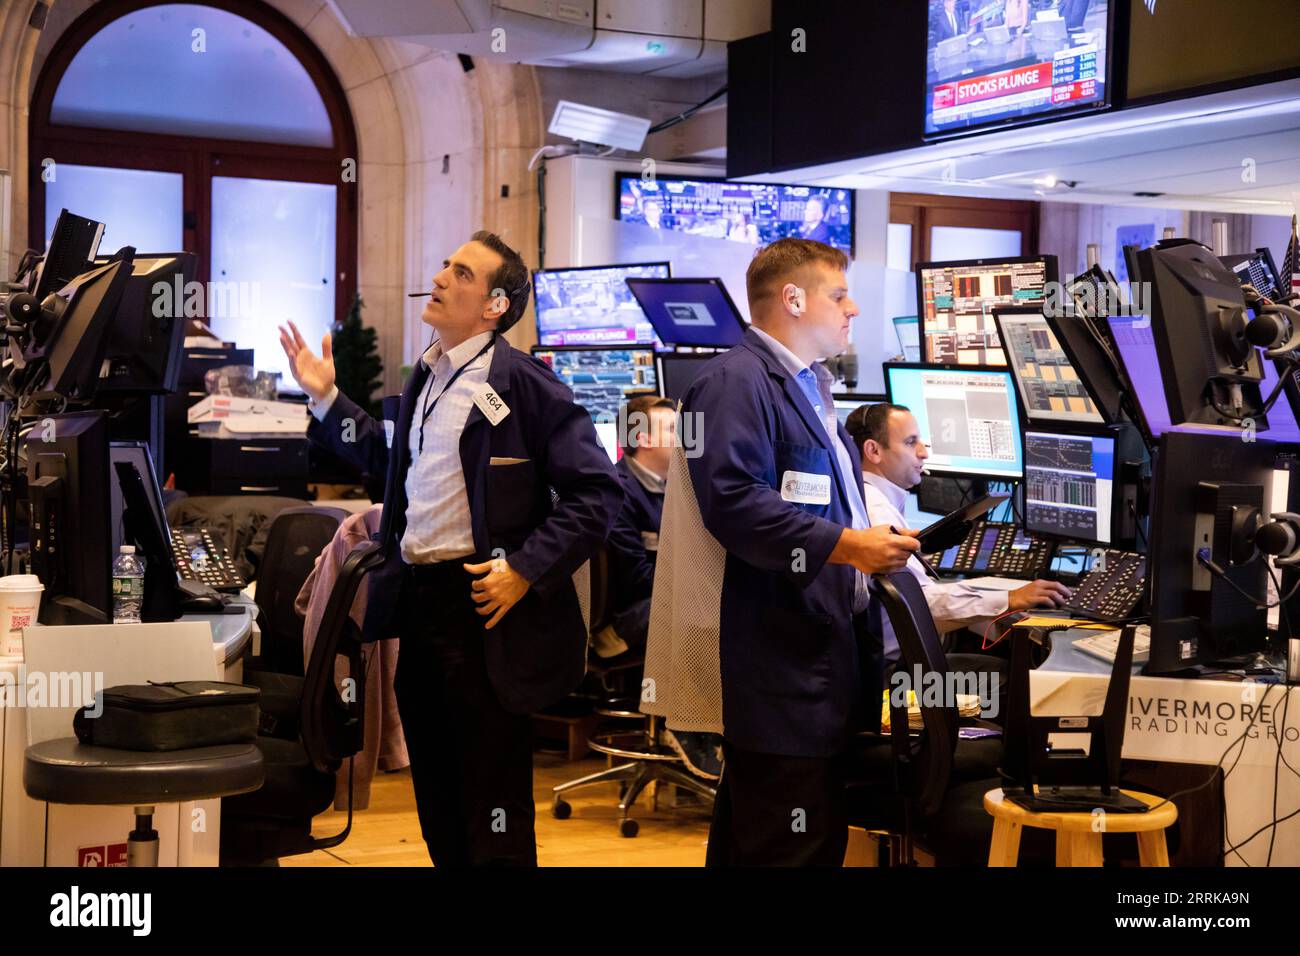 220827 -- NEW YORK, Aug. 27, 2022 -- Traders work at the New York Stock Exchange NYSE in New York, the United States, on Aug. 26, 2022. U.S. stocks plummeted on Friday as Federal Reserve Chairman Jerome Powell s tough stance against inflation dashed market hopes that the central bank would soon reverse course. The Dow Jones Industrial Average plunged 1,008.38 points, or 3.03 percent, to 32,283.40. The S&P 500 tumbled 141.46 points, or 3.37 percent, to 4,057.66. The Nasdaq Composite Index shed 497.56 points, or 3.94 percent, to 12,141.71. U.S.-NEW YORK-STOCK MARKET-FALL WangxYingtonglian PUBLIC Stock Photo